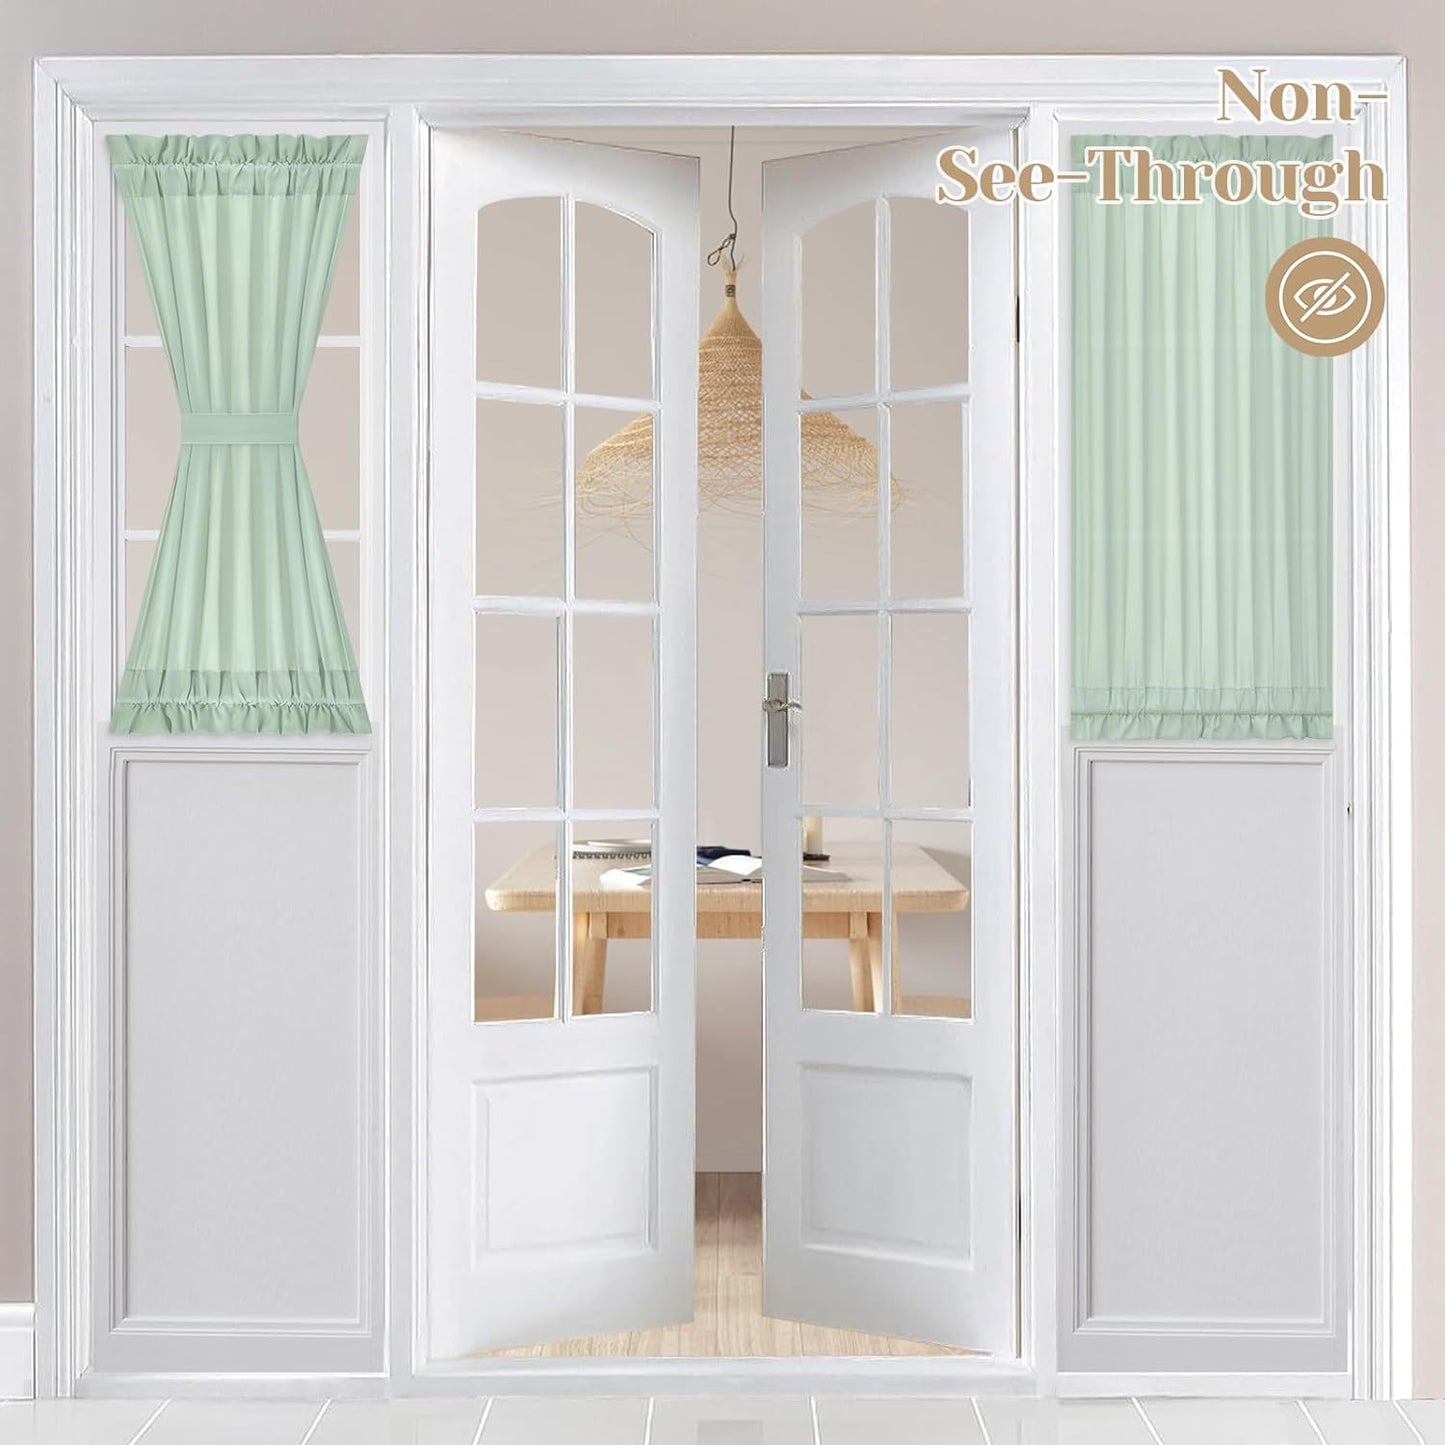 HOMEIDEAS Non-See-Through Sidelight Curtains for Front Door, Privacy Semi Sheer Door Window Curtains, Rod Pocket Light Filtering French Door Curtains with Tieback, (1 Panel, White, 26W X 72L)  HOMEIDEAS Sage Green 2 Panels-26 X 40 